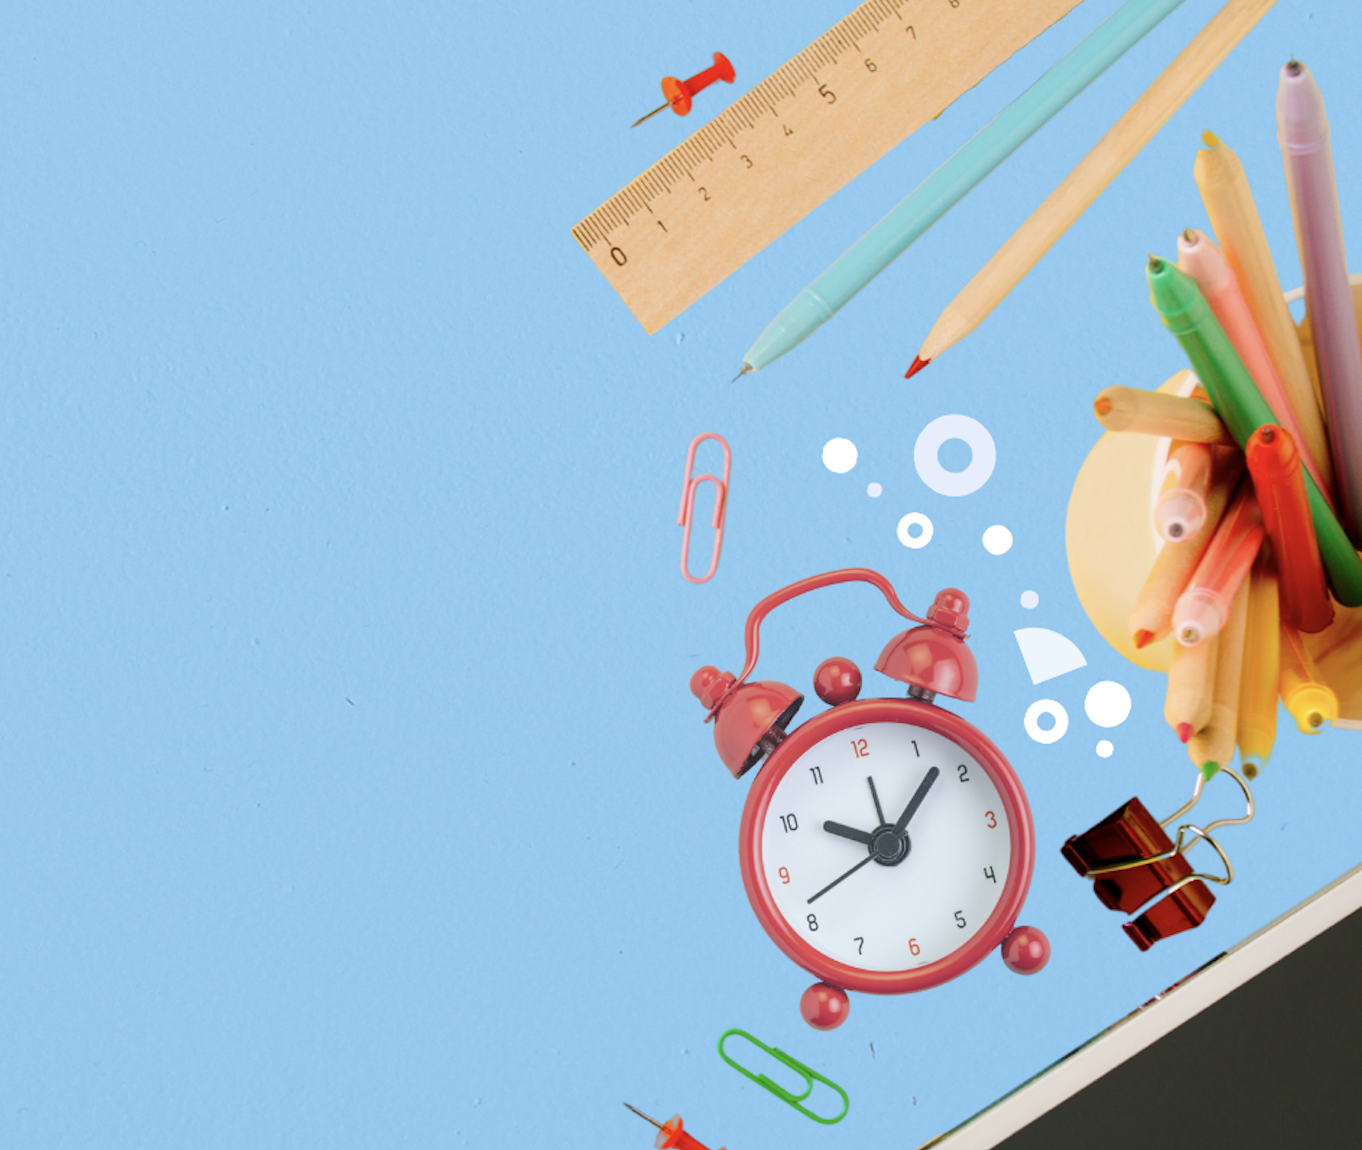 A group of school supplies including a ruler and alarm clock on a blue background.